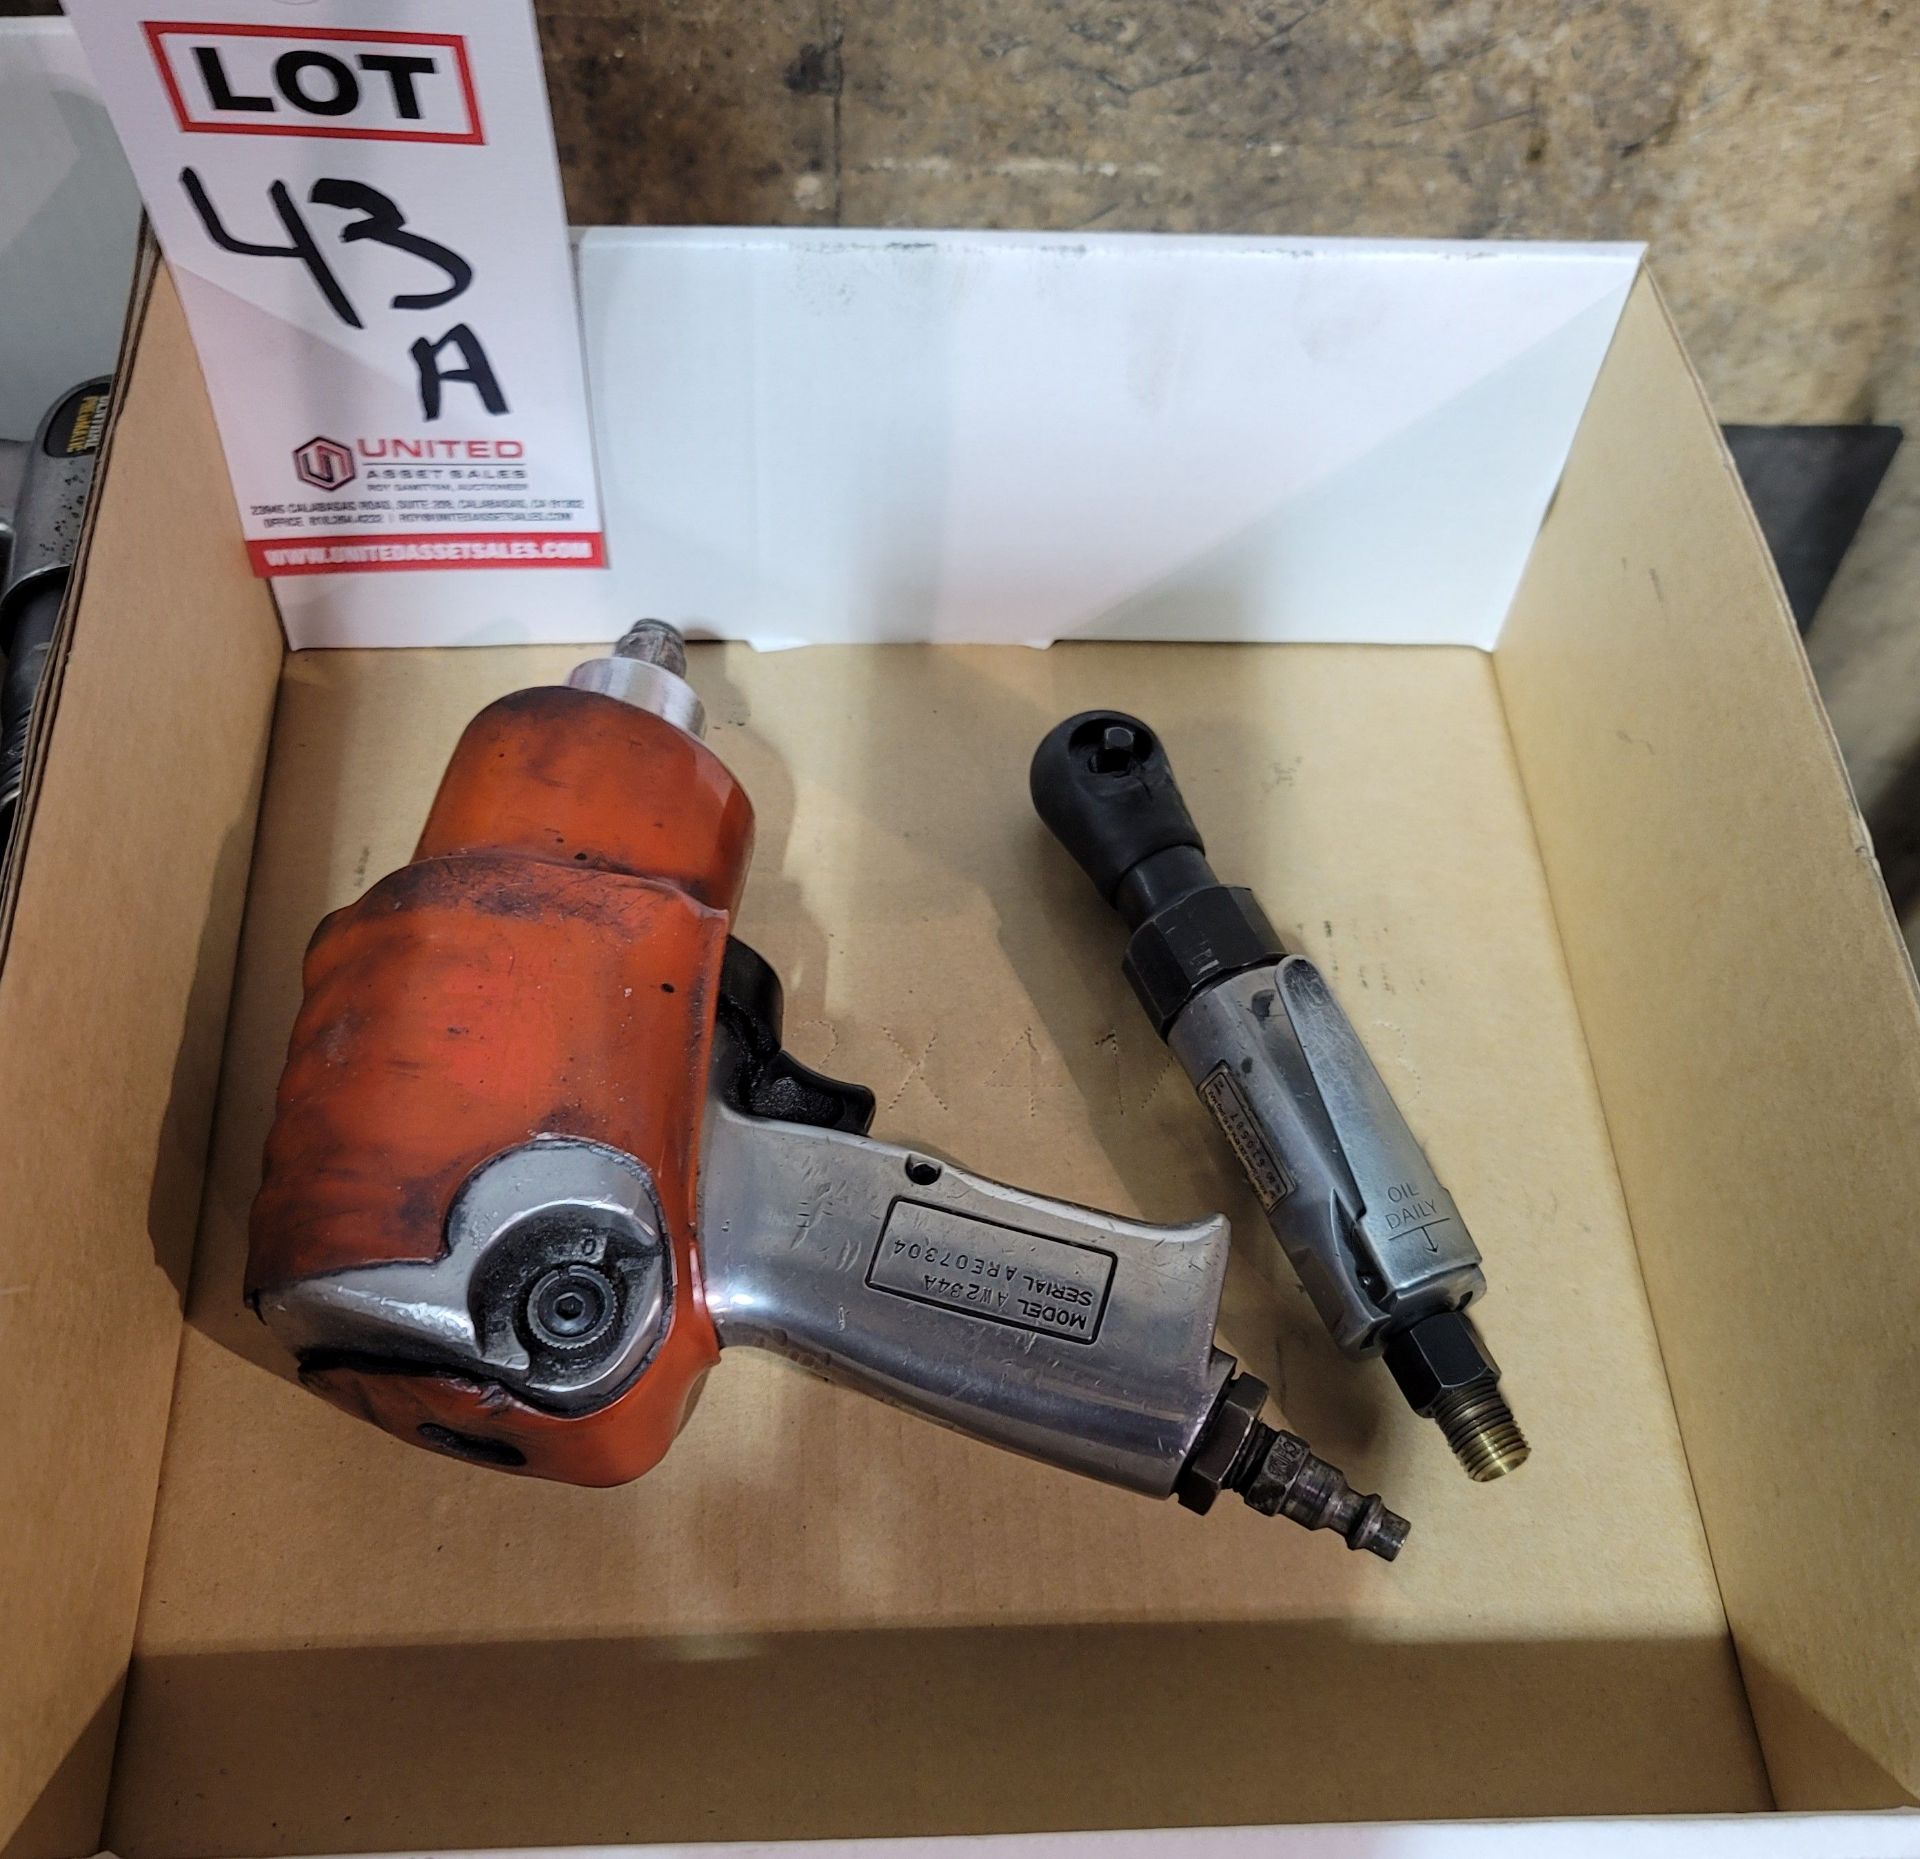 LOT - (2) AIR TOOLS: (1) 1/2" IMPACT WRENCH AND (1) 1/4" RATCHET